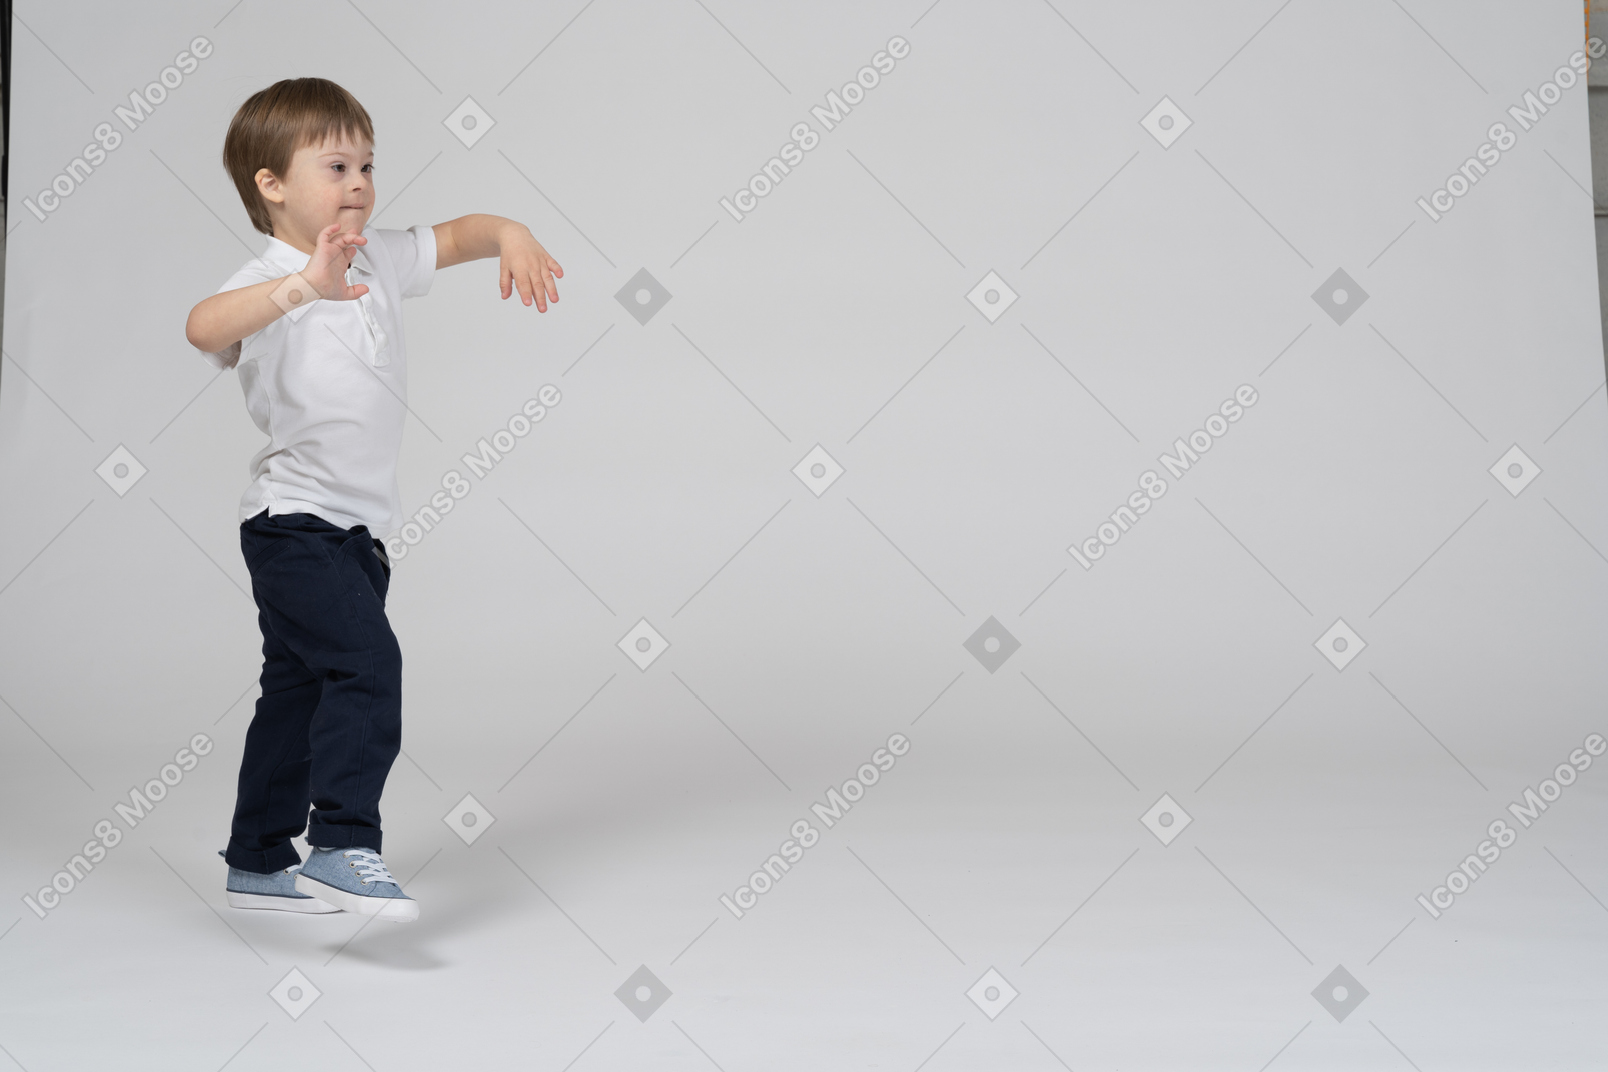 Three-quarter view of a boy jumping and playing around